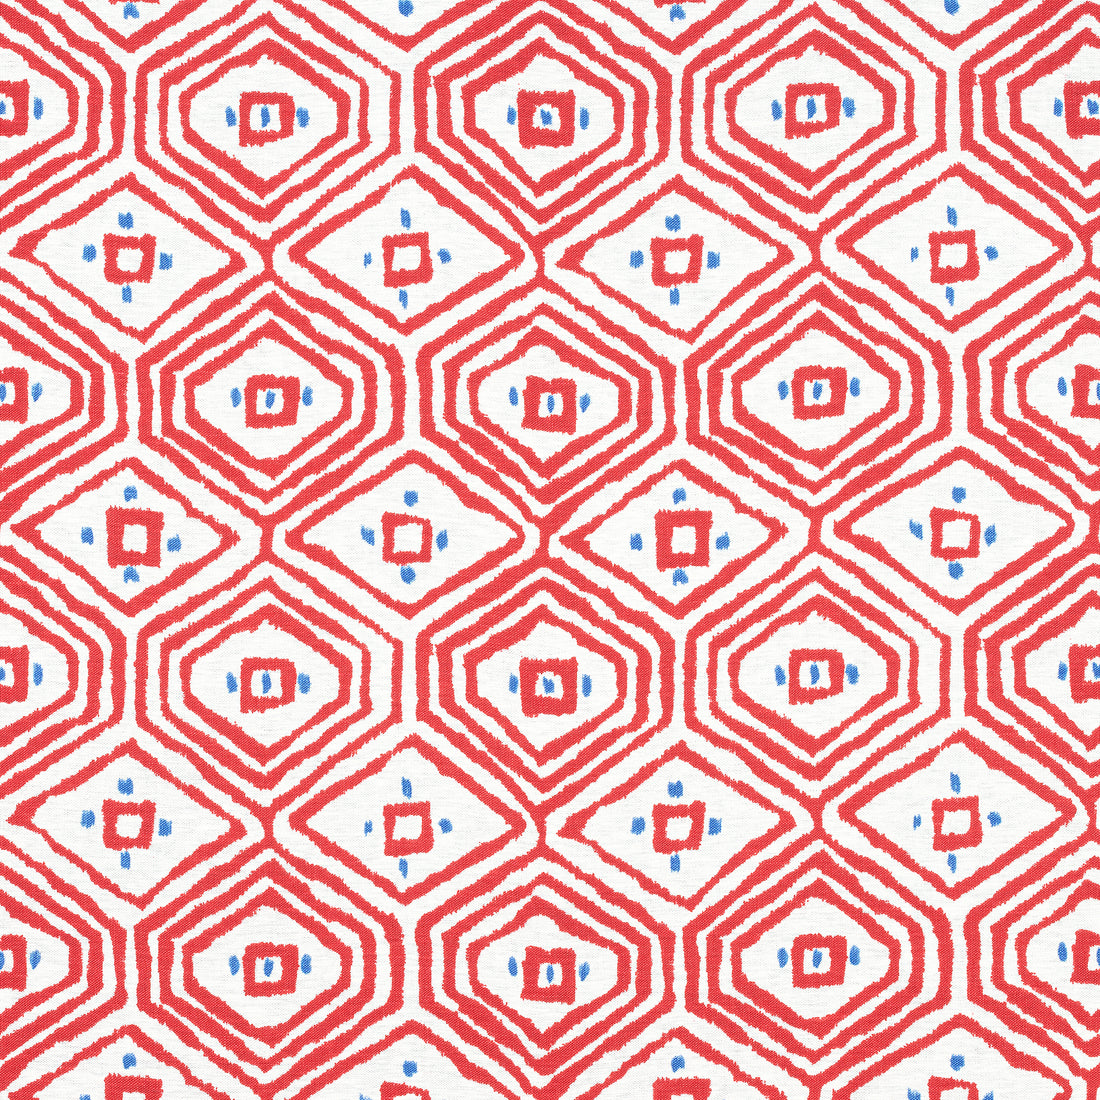 Pass-A-Grille fabric in red color - pattern number F910614 - by Thibaut in the Ceylon collection